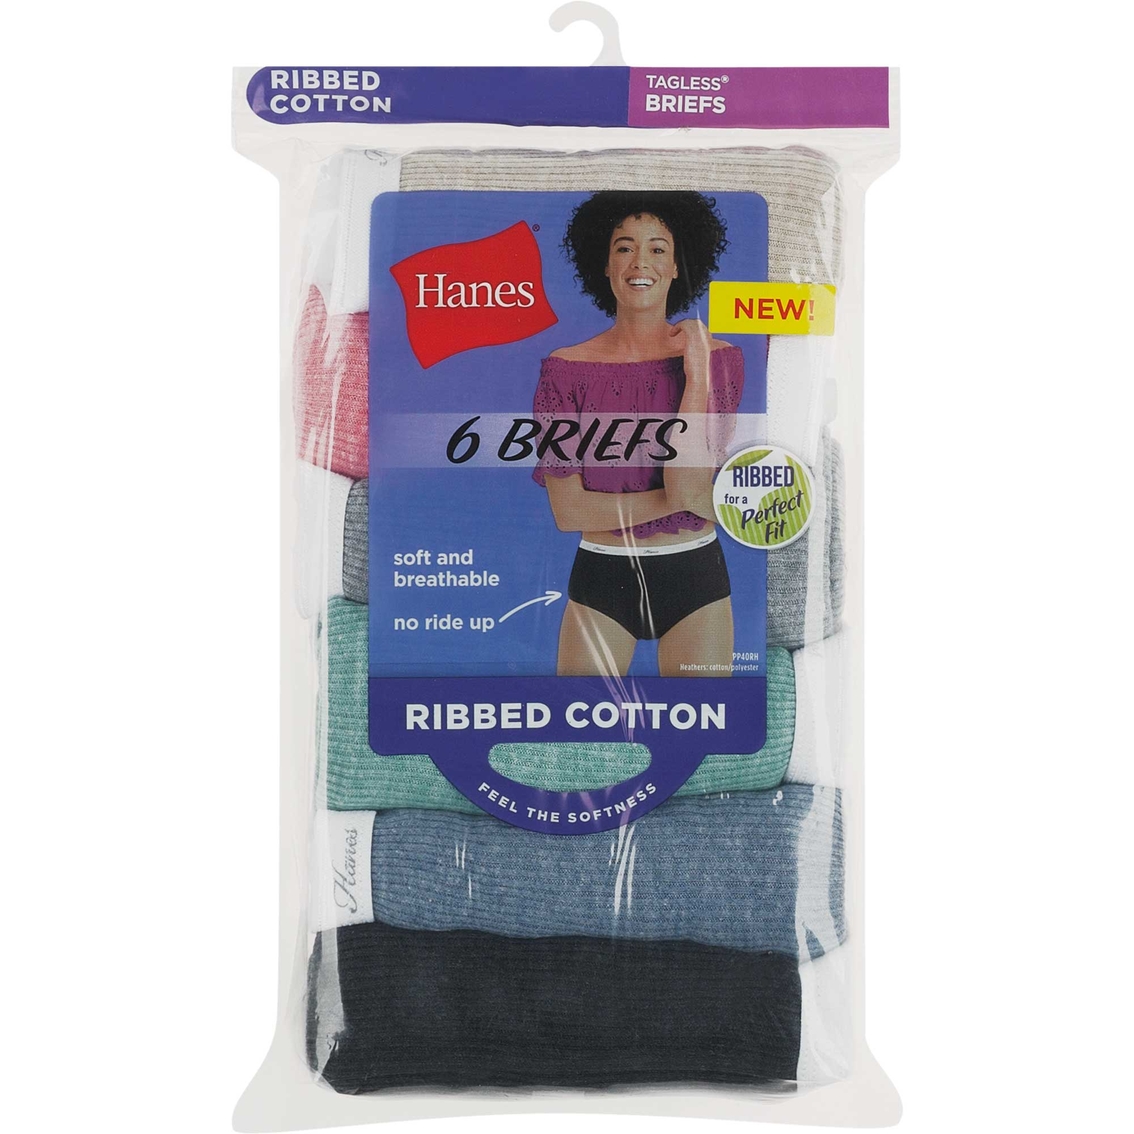 Hanes Ribbed Cotton Briefs 6 Pk., Panties, Clothing & Accessories